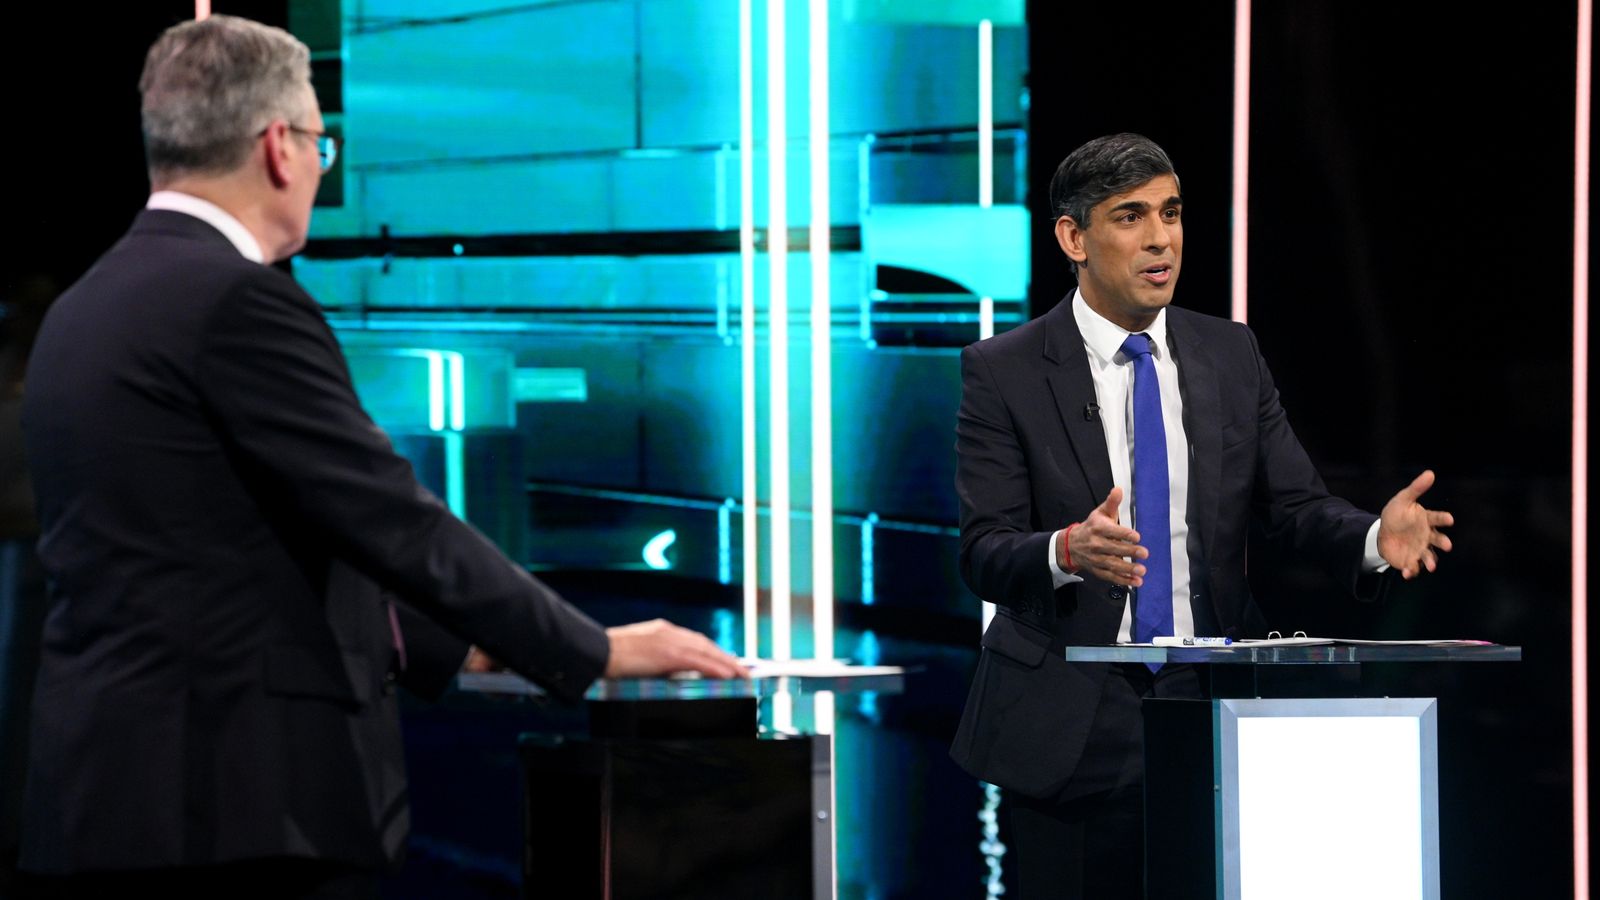 Doubt cast on Sunak's £2,000 Labour tax attack during TV debate - as PM accused of 'lie'